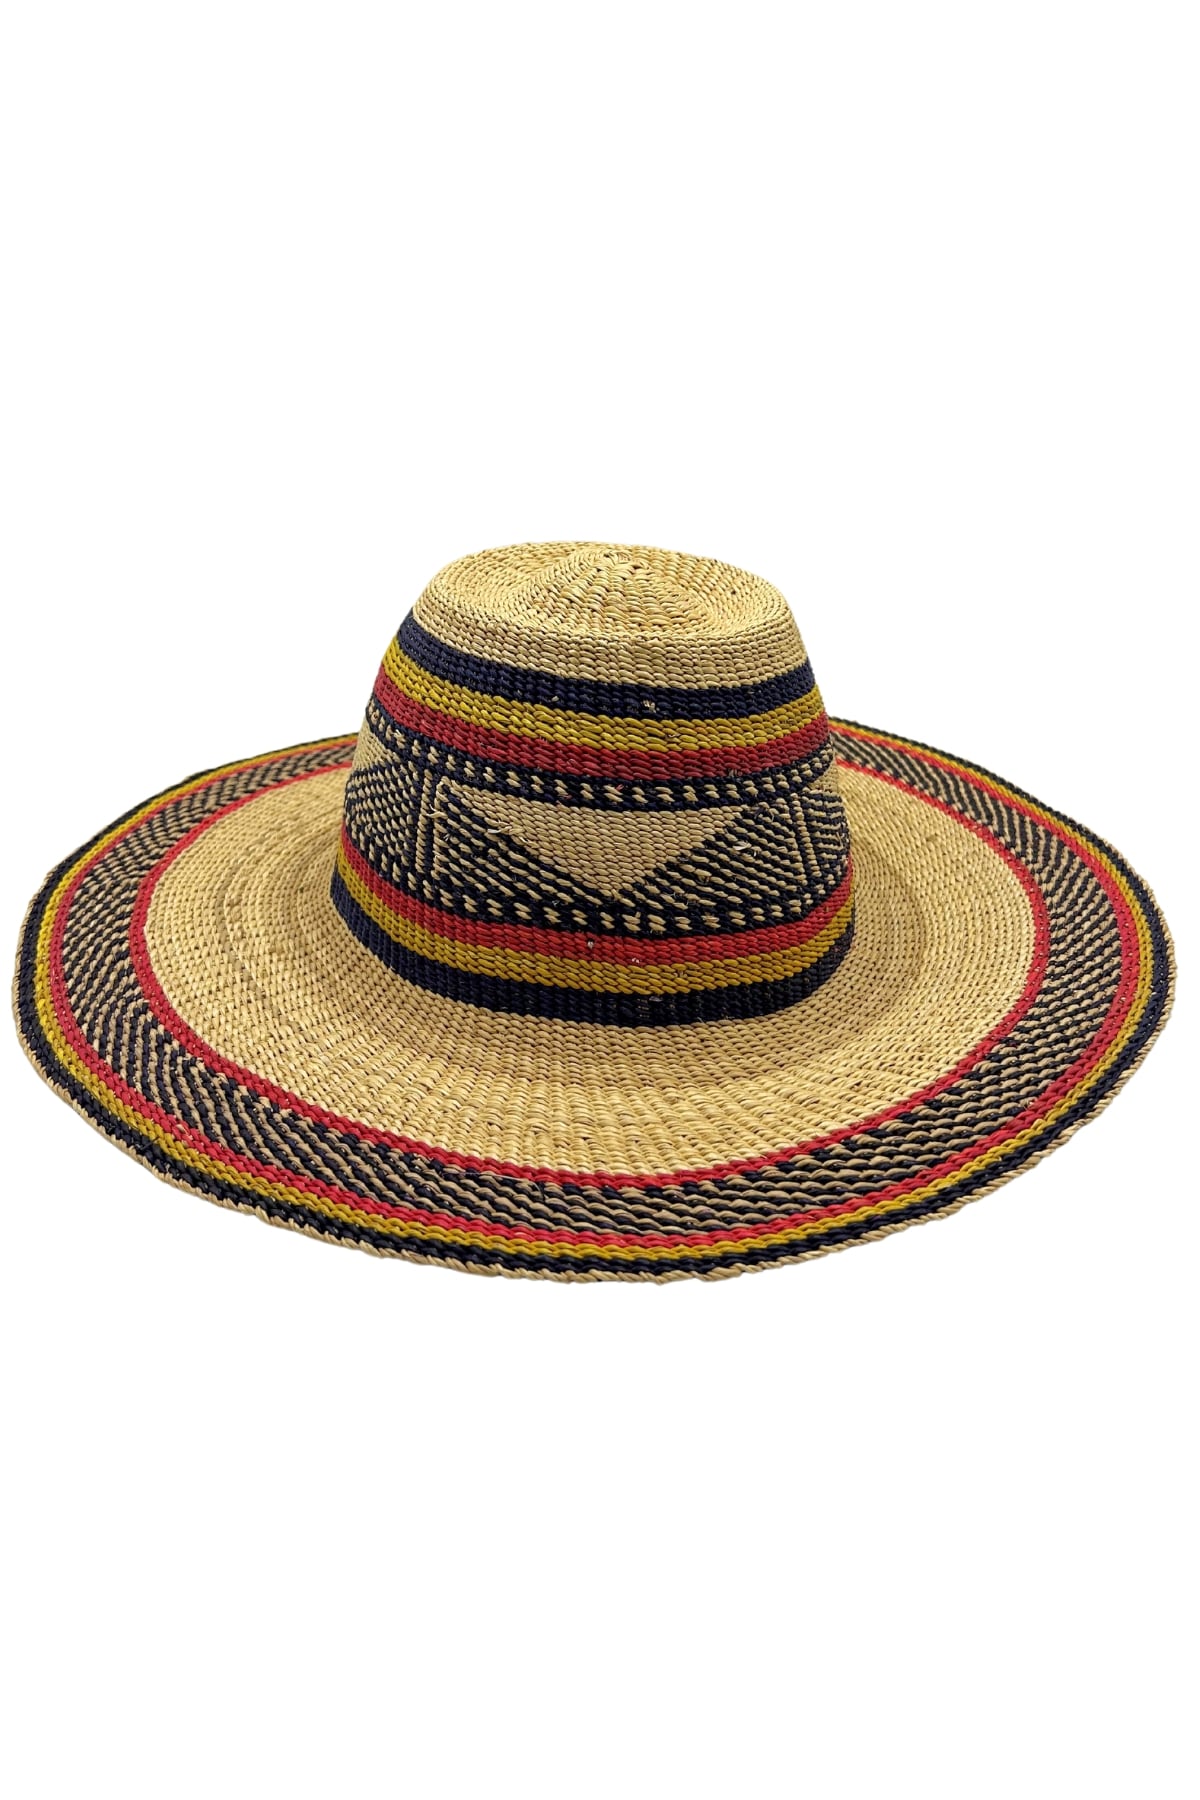 Straw Hats at Lowes.com